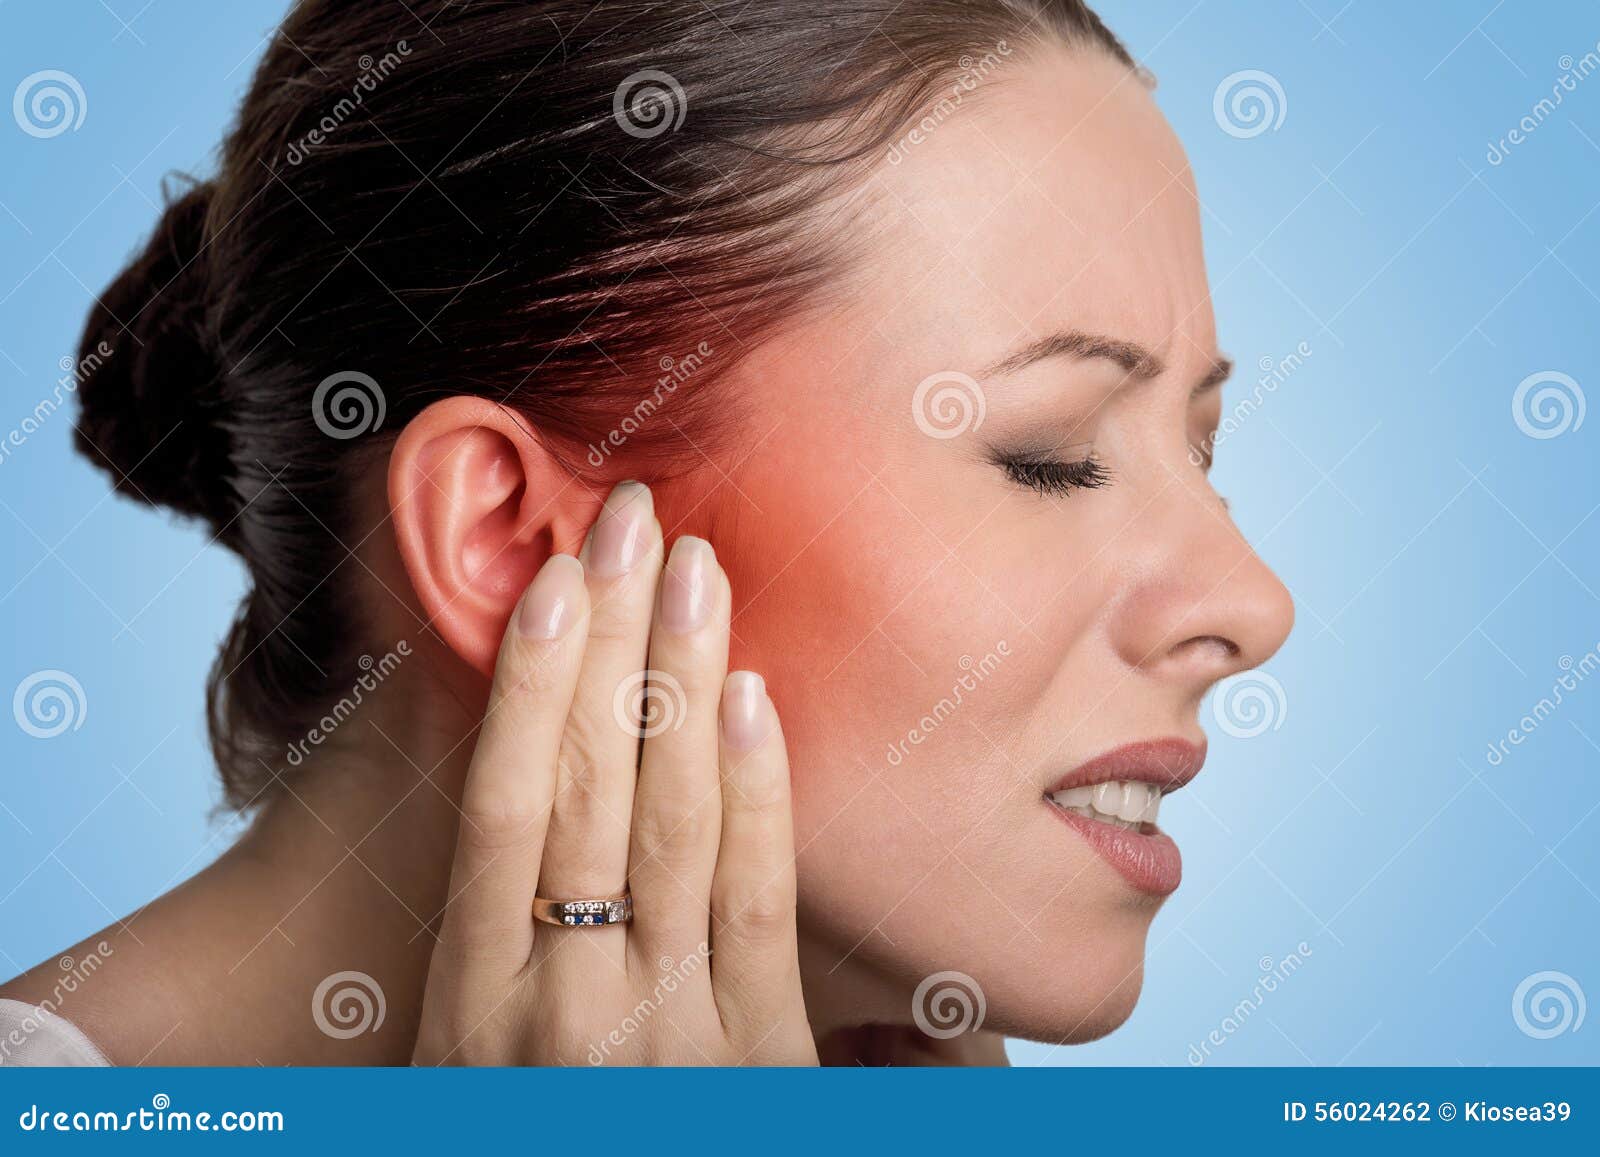 sick female having ear pain touching her painful head